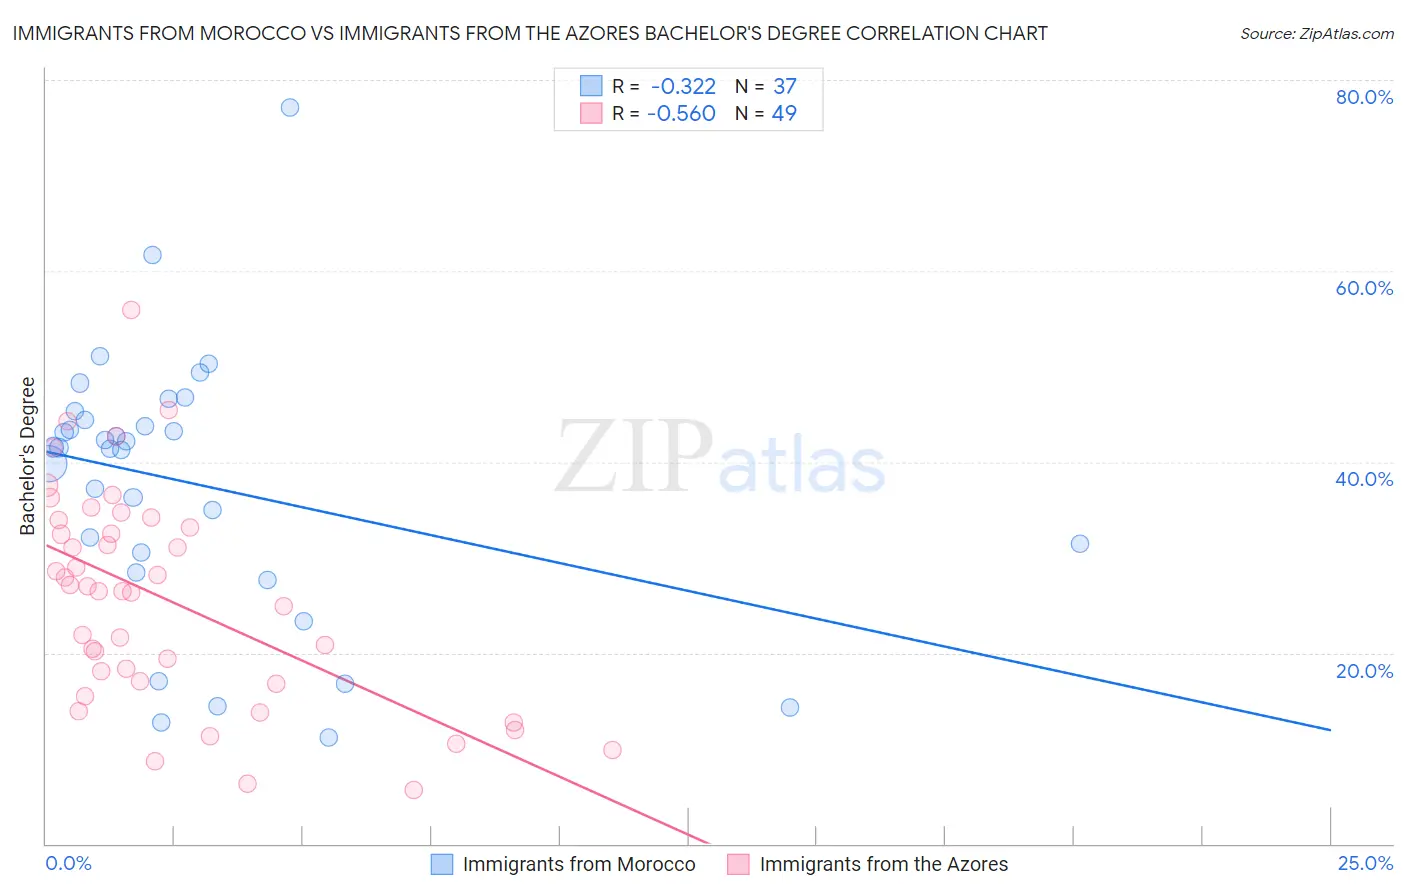 Immigrants from Morocco vs Immigrants from the Azores Bachelor's Degree